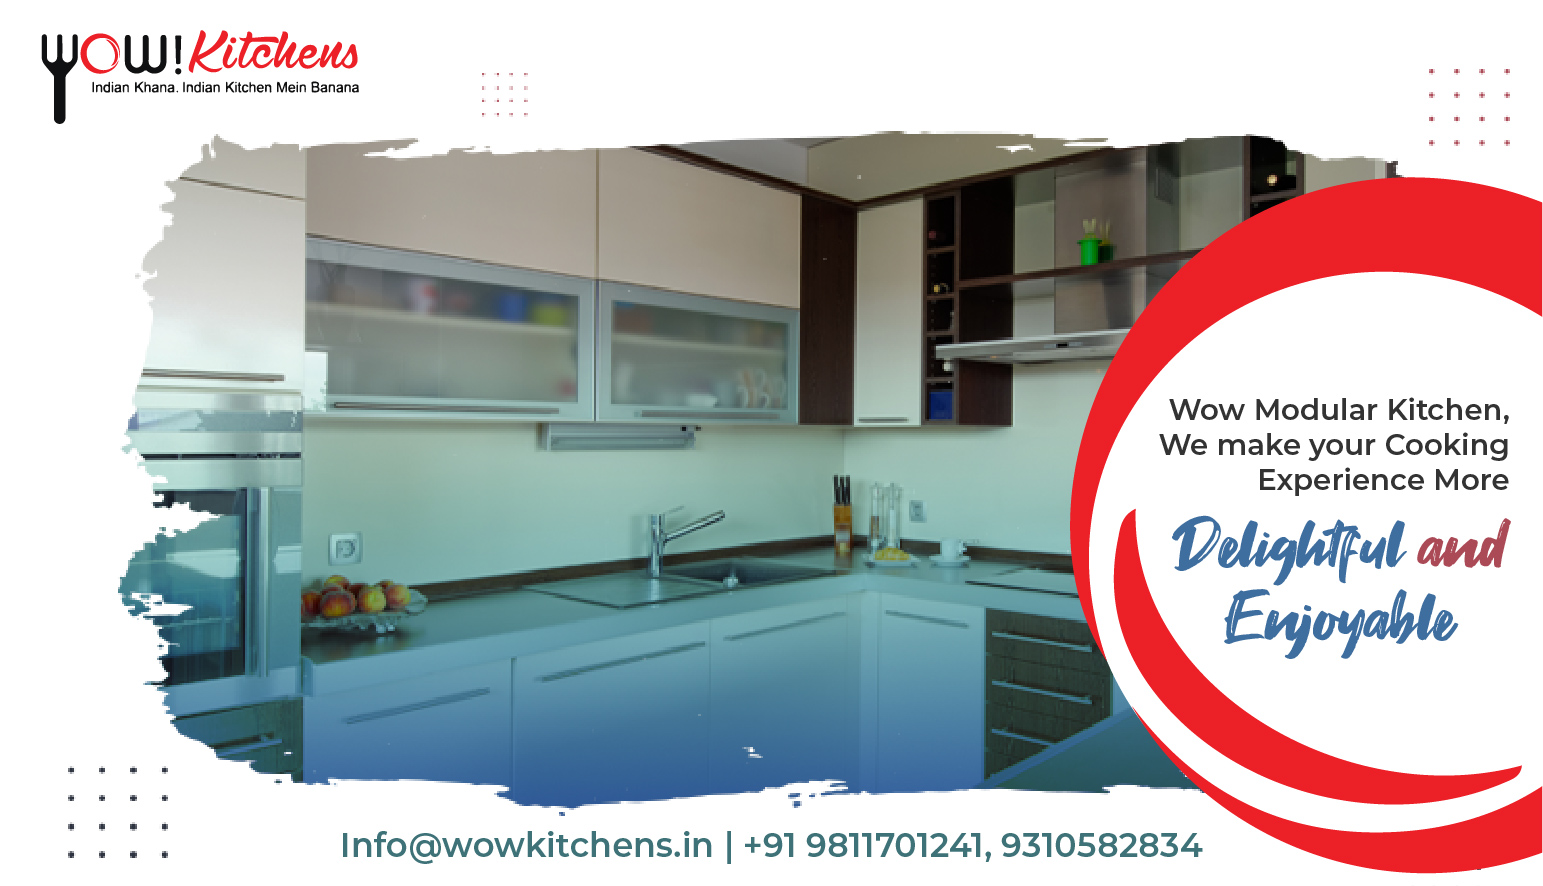 Wow Modular Kitchen, we make your Cooking Experience More Delightful and Enjoyable